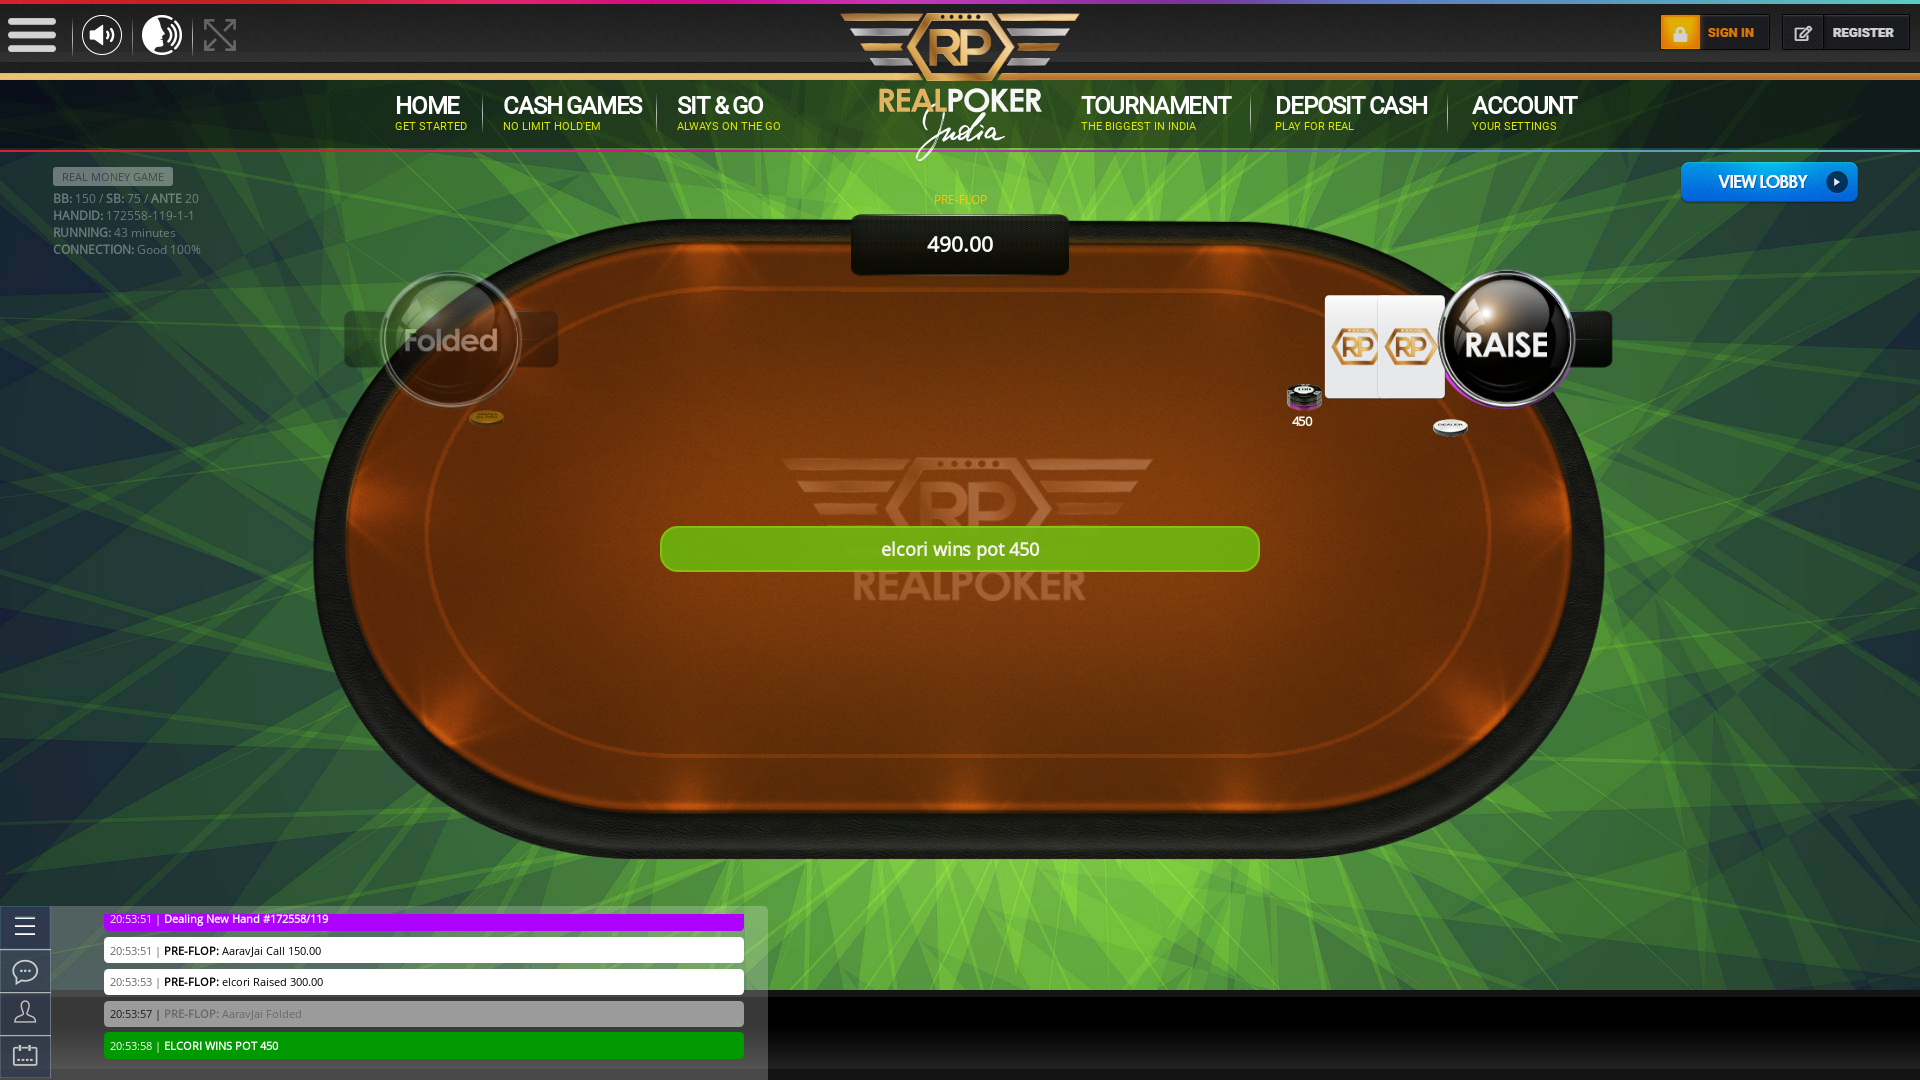 Real poker 10 player table in the 43rd minute of the match